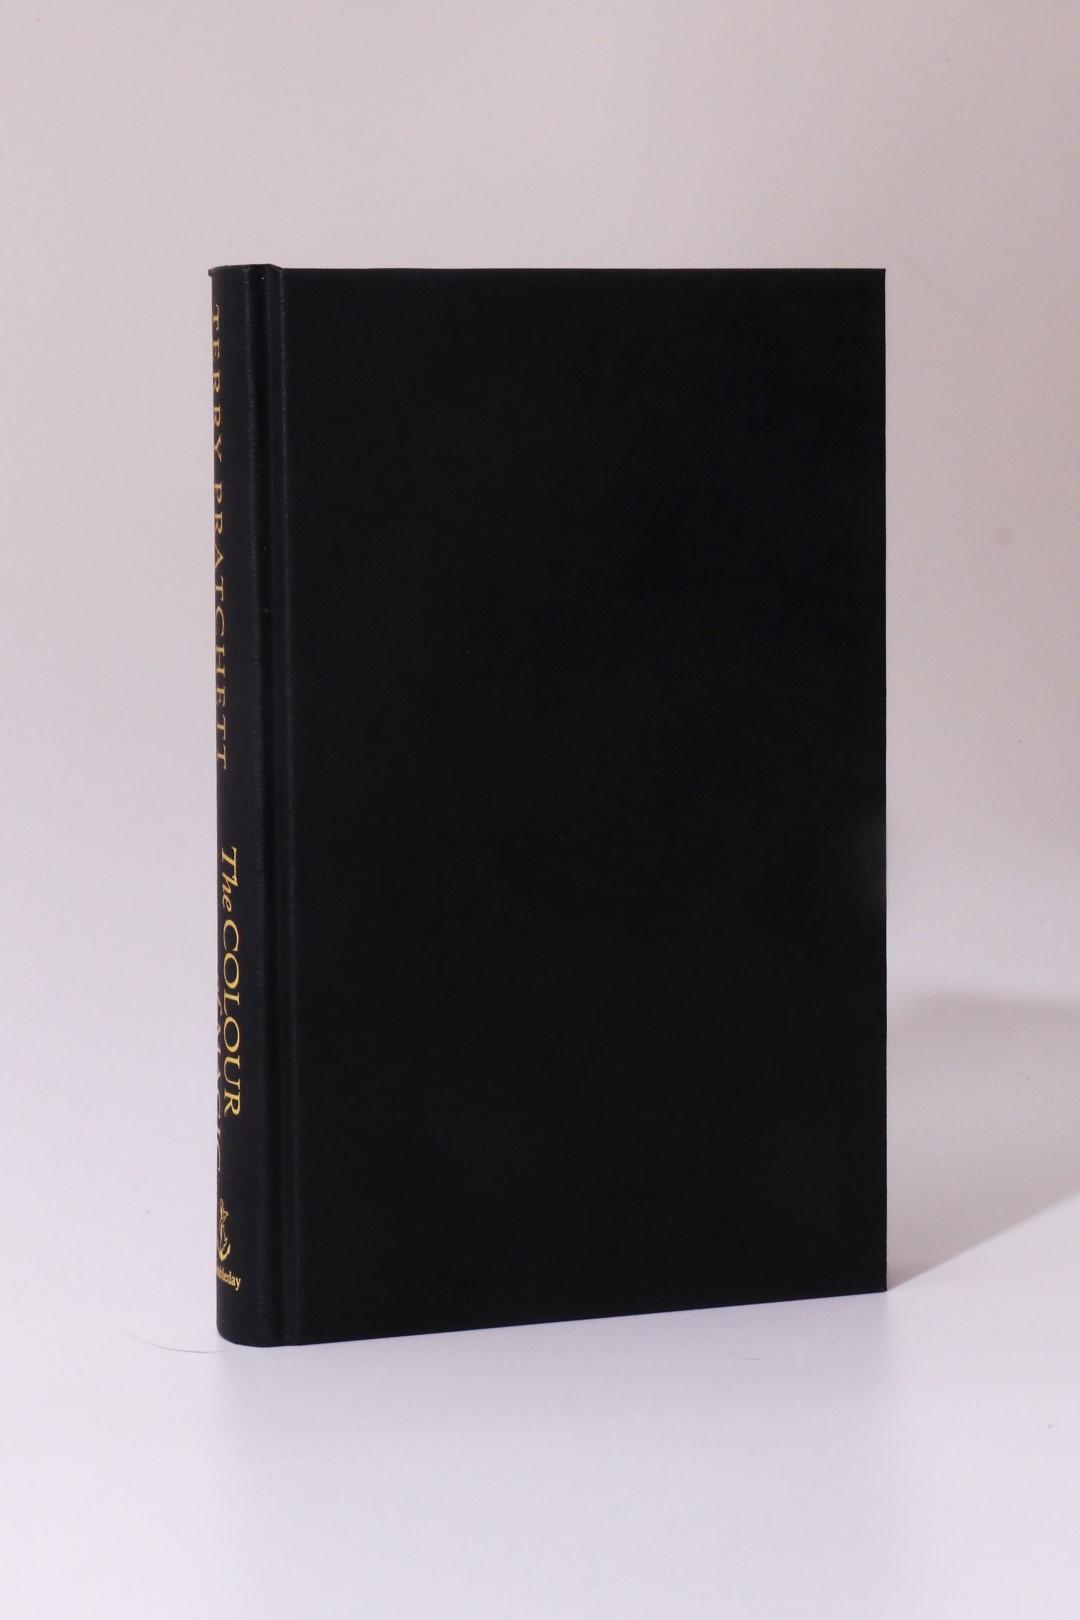 Terry Pratchett - The Colour of Magic - Doubleday, 2004, Signed Limited Edition.